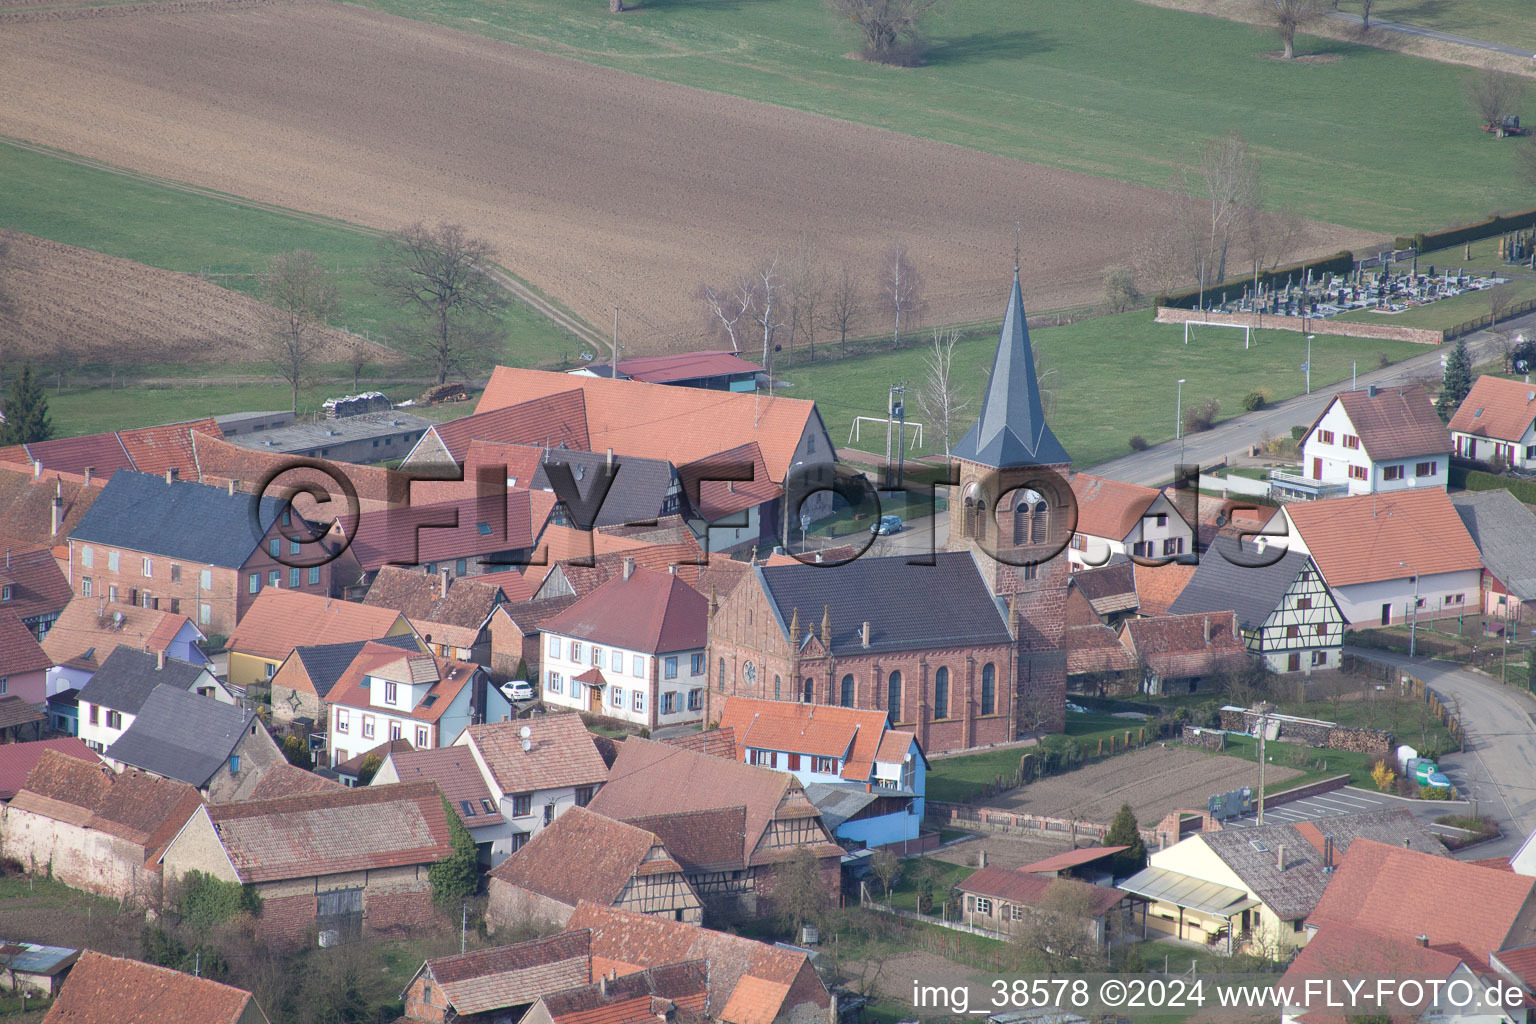 Aerial view of Village - view on the edge of agricultural fields and farmland in Geiswiller in Grand Est, France